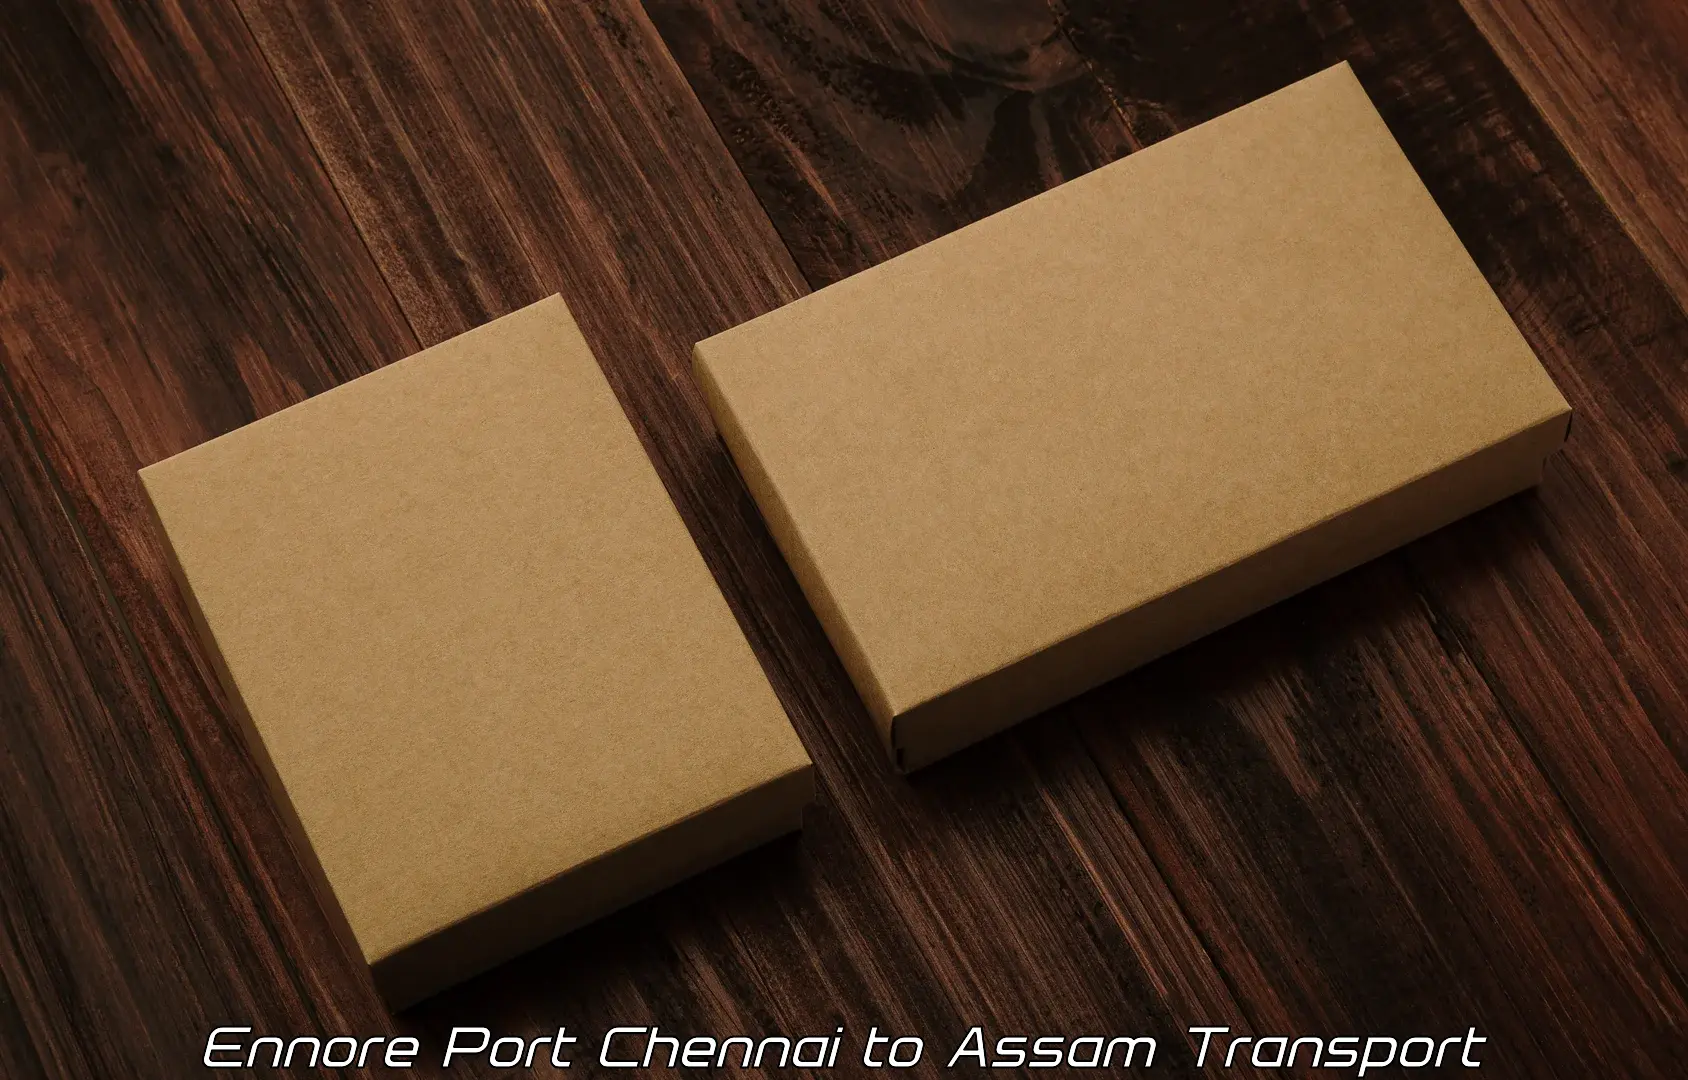 Land transport services in Ennore Port Chennai to Bhergaon